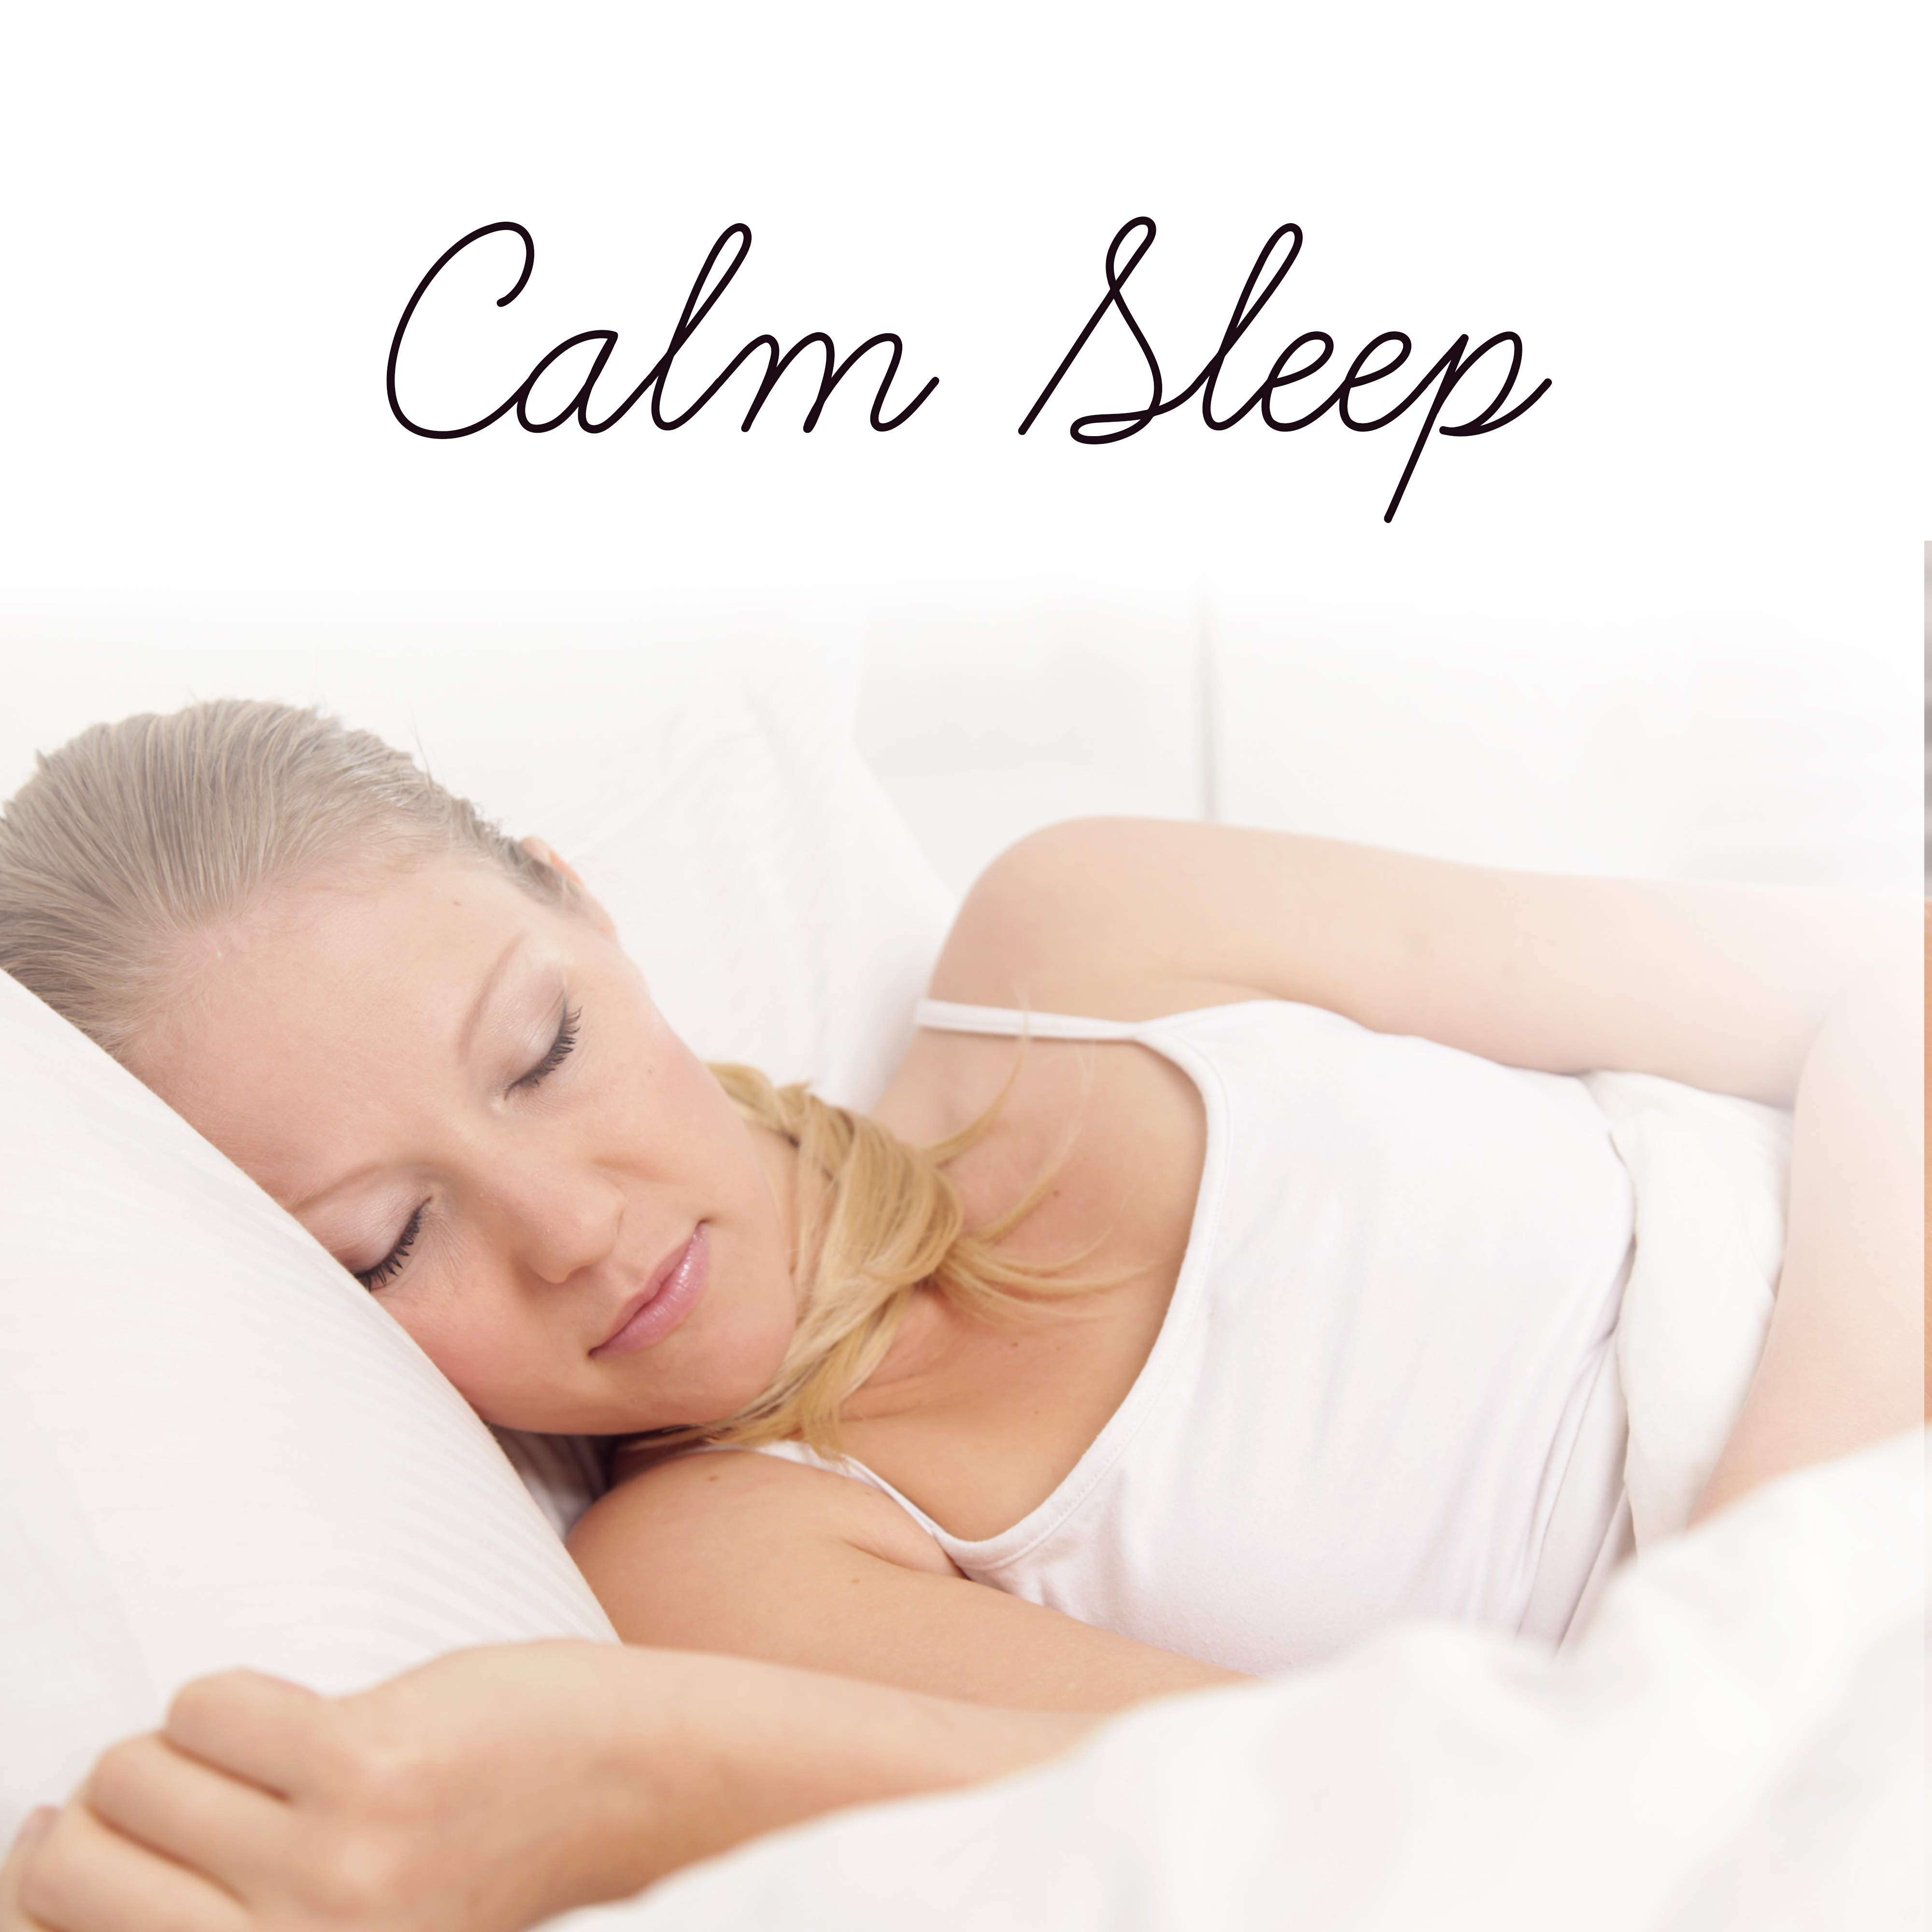 Calm Sleep  Soft Music to Bed, Relaxing Therapy at Night, Lullabies, Pure Sleep, Peaceful Mind, Soothing Water, Rain